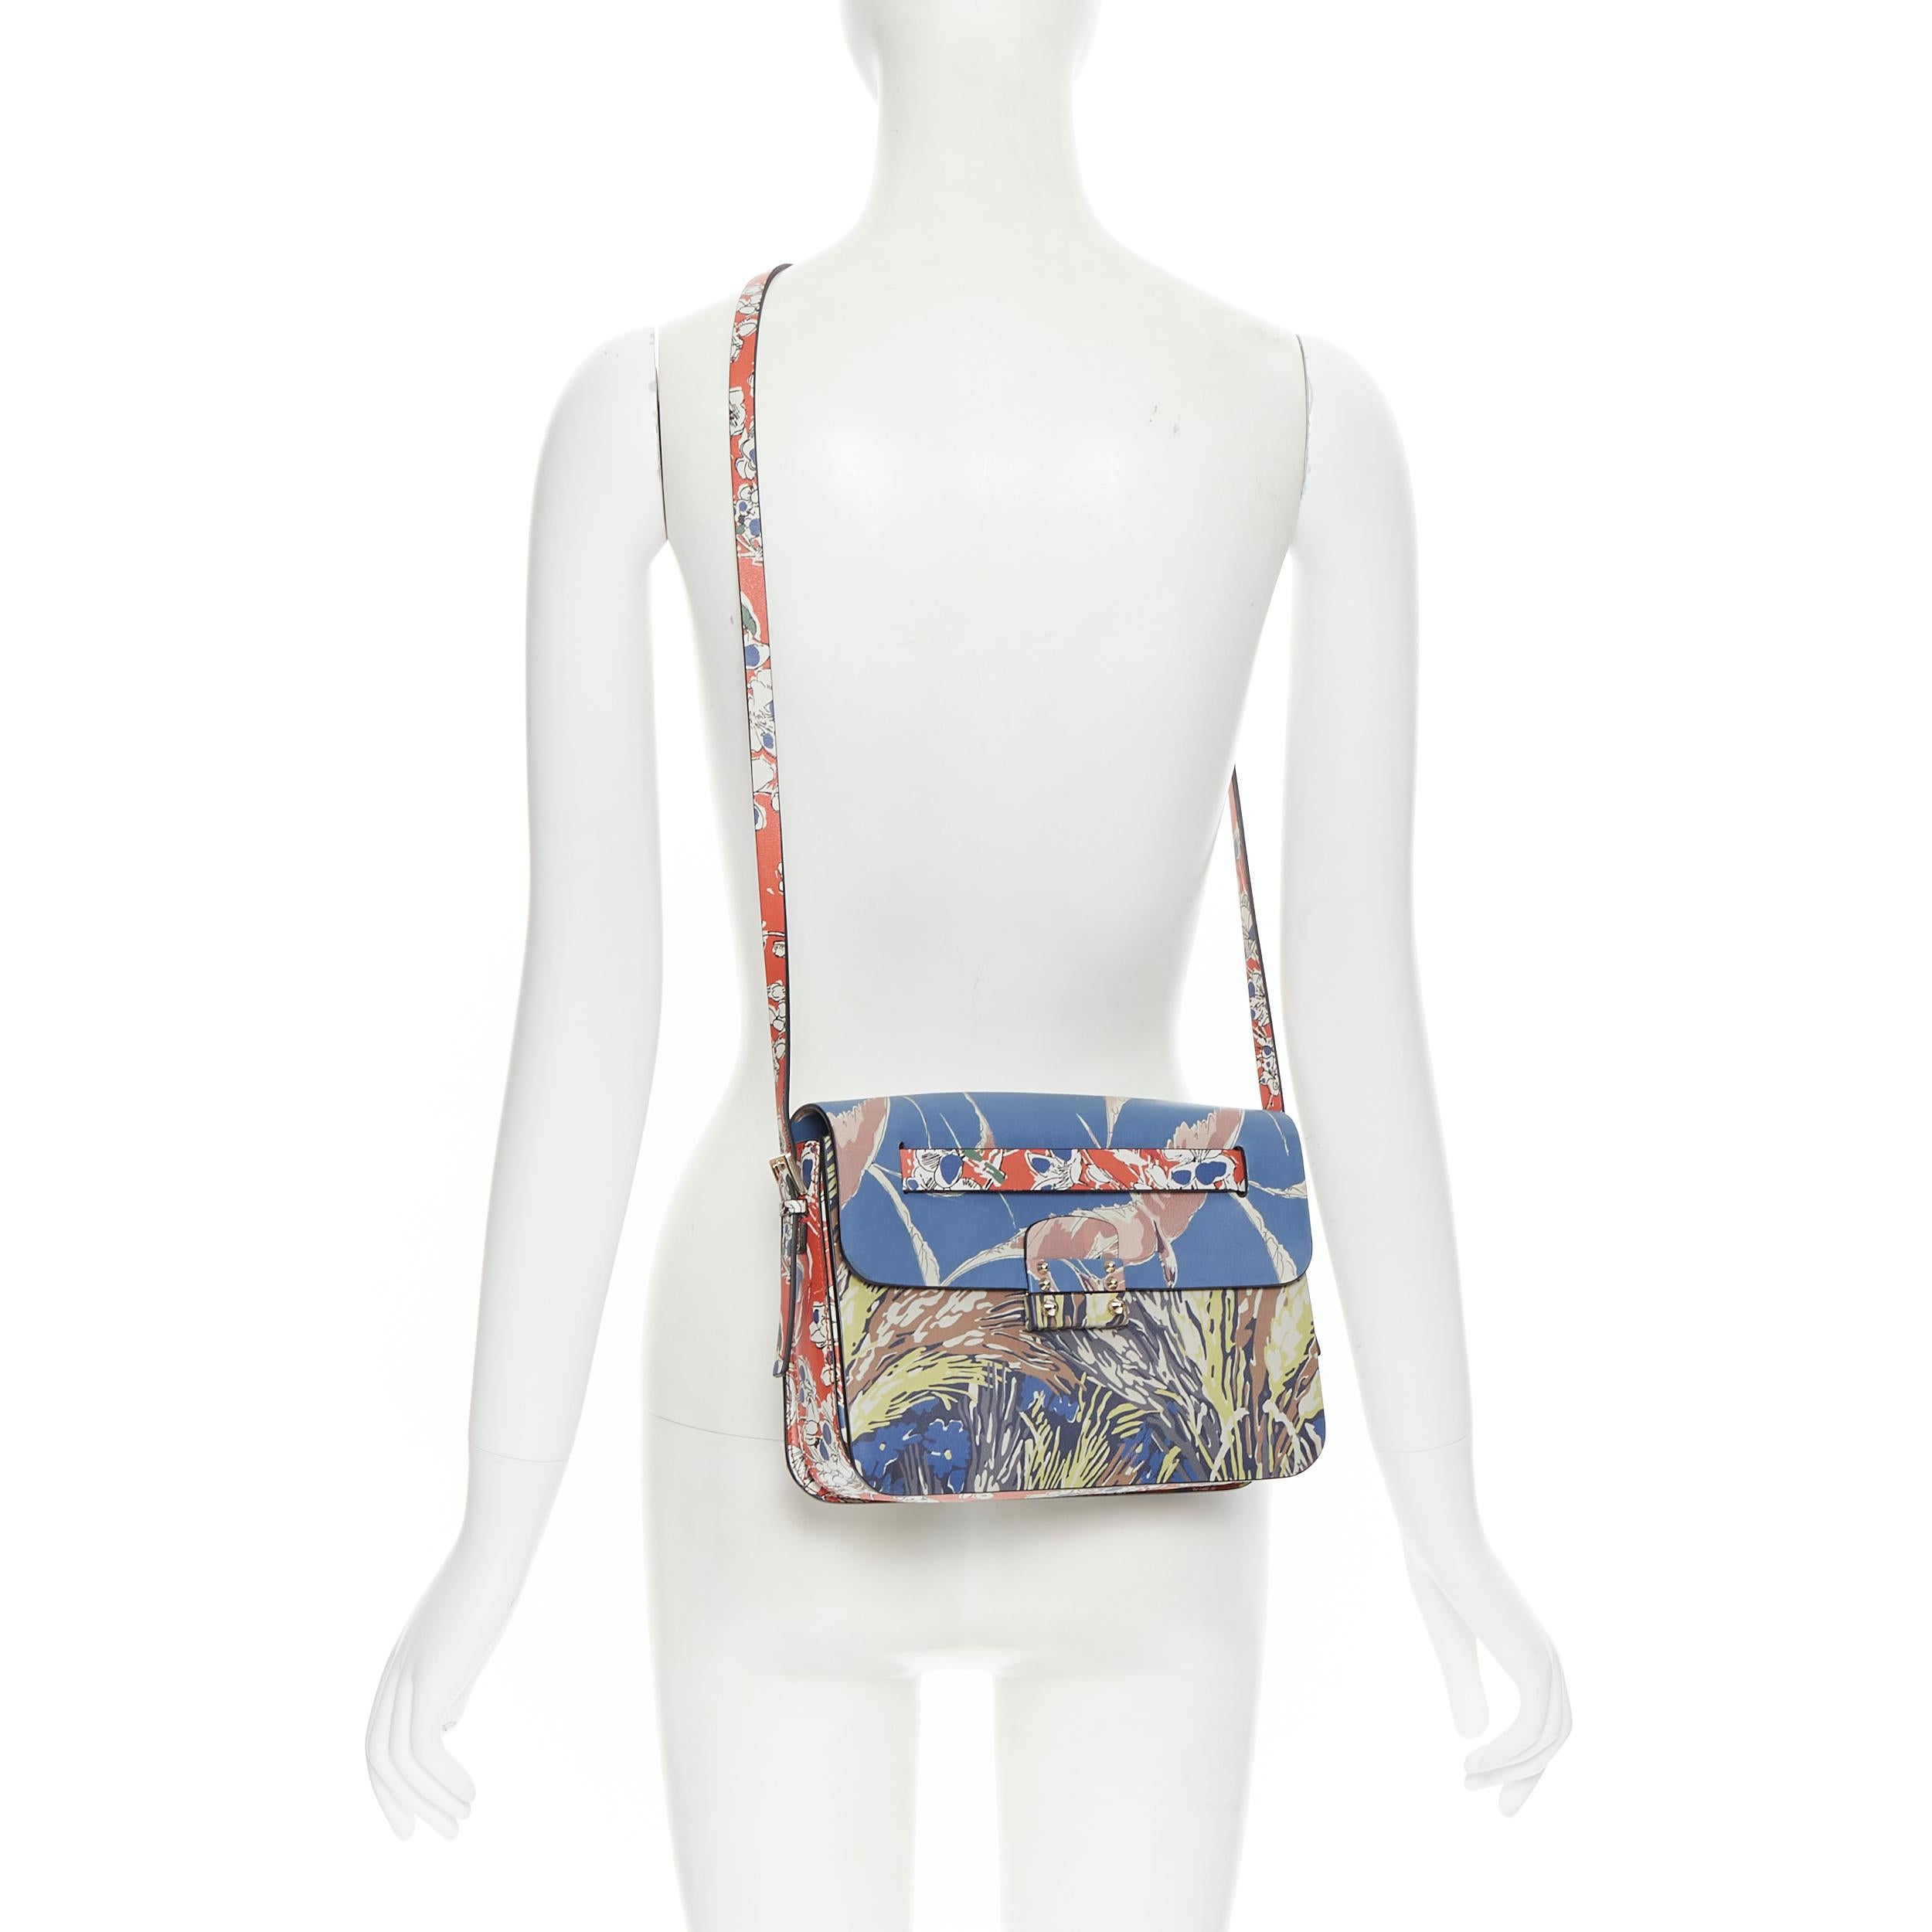 VALENTINO Garden Couture Mime floral print leather clasp flap crossbody bag Reference: TGAS/B00585 Brand: Valentino Model: Garden Couture Mime Material: Leather Color: Blue Pattern: Floral Closure: Clasp CONDITION: Condition: Excellent, this item